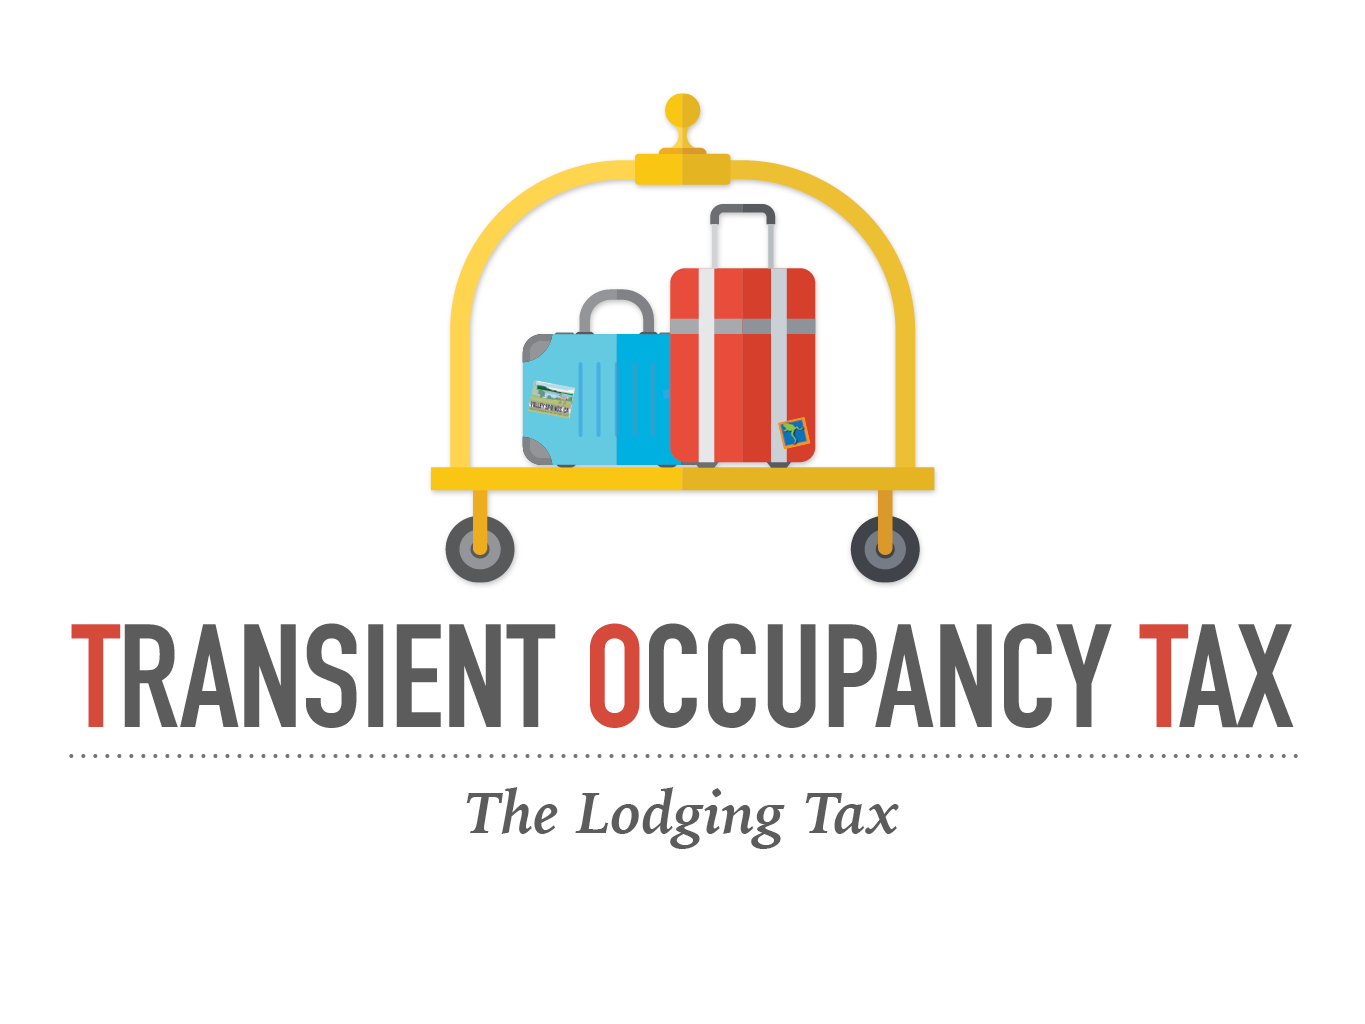 Region’s lodging tax revenues rebound, exceed pre-pandemic levels